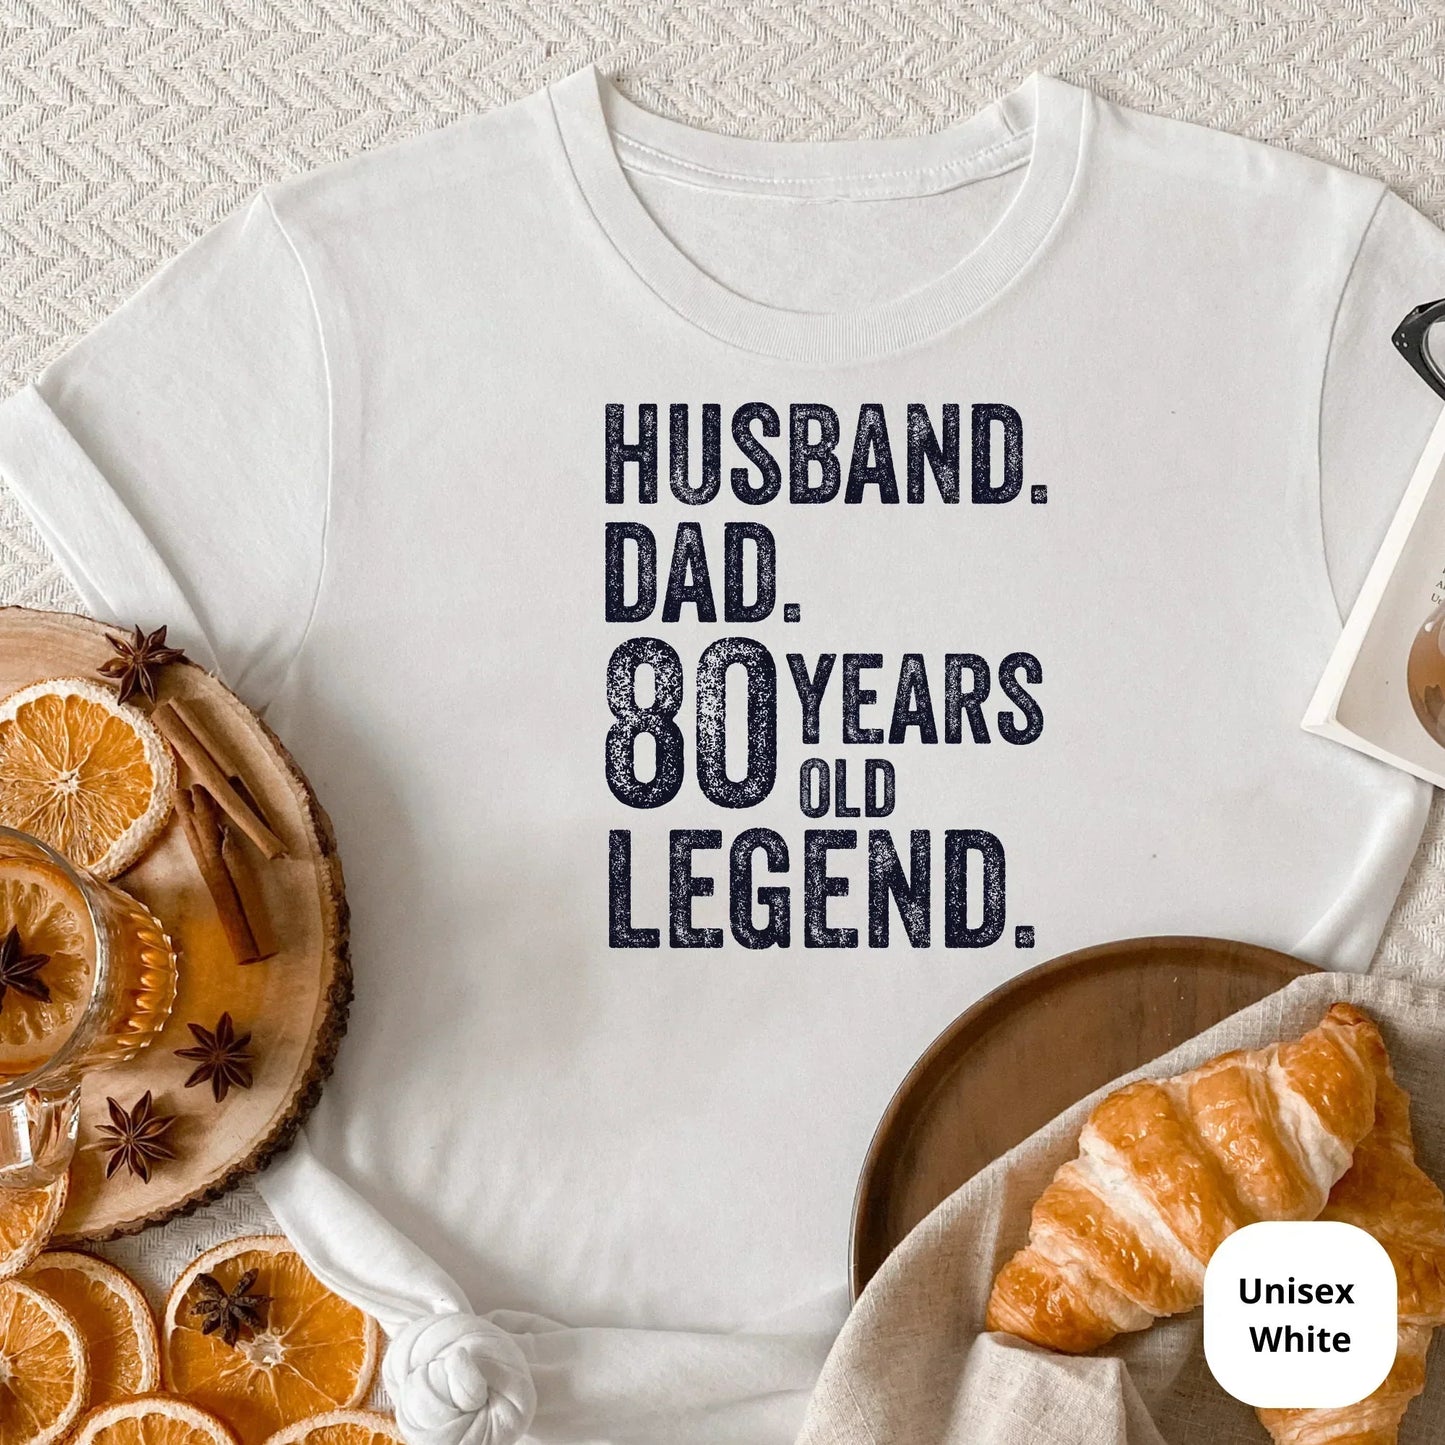 Husband, Dad, 80 Year Old Legend, Celebrate a Lifetime of Memories with Our Customizable 80th Birthday Shirt